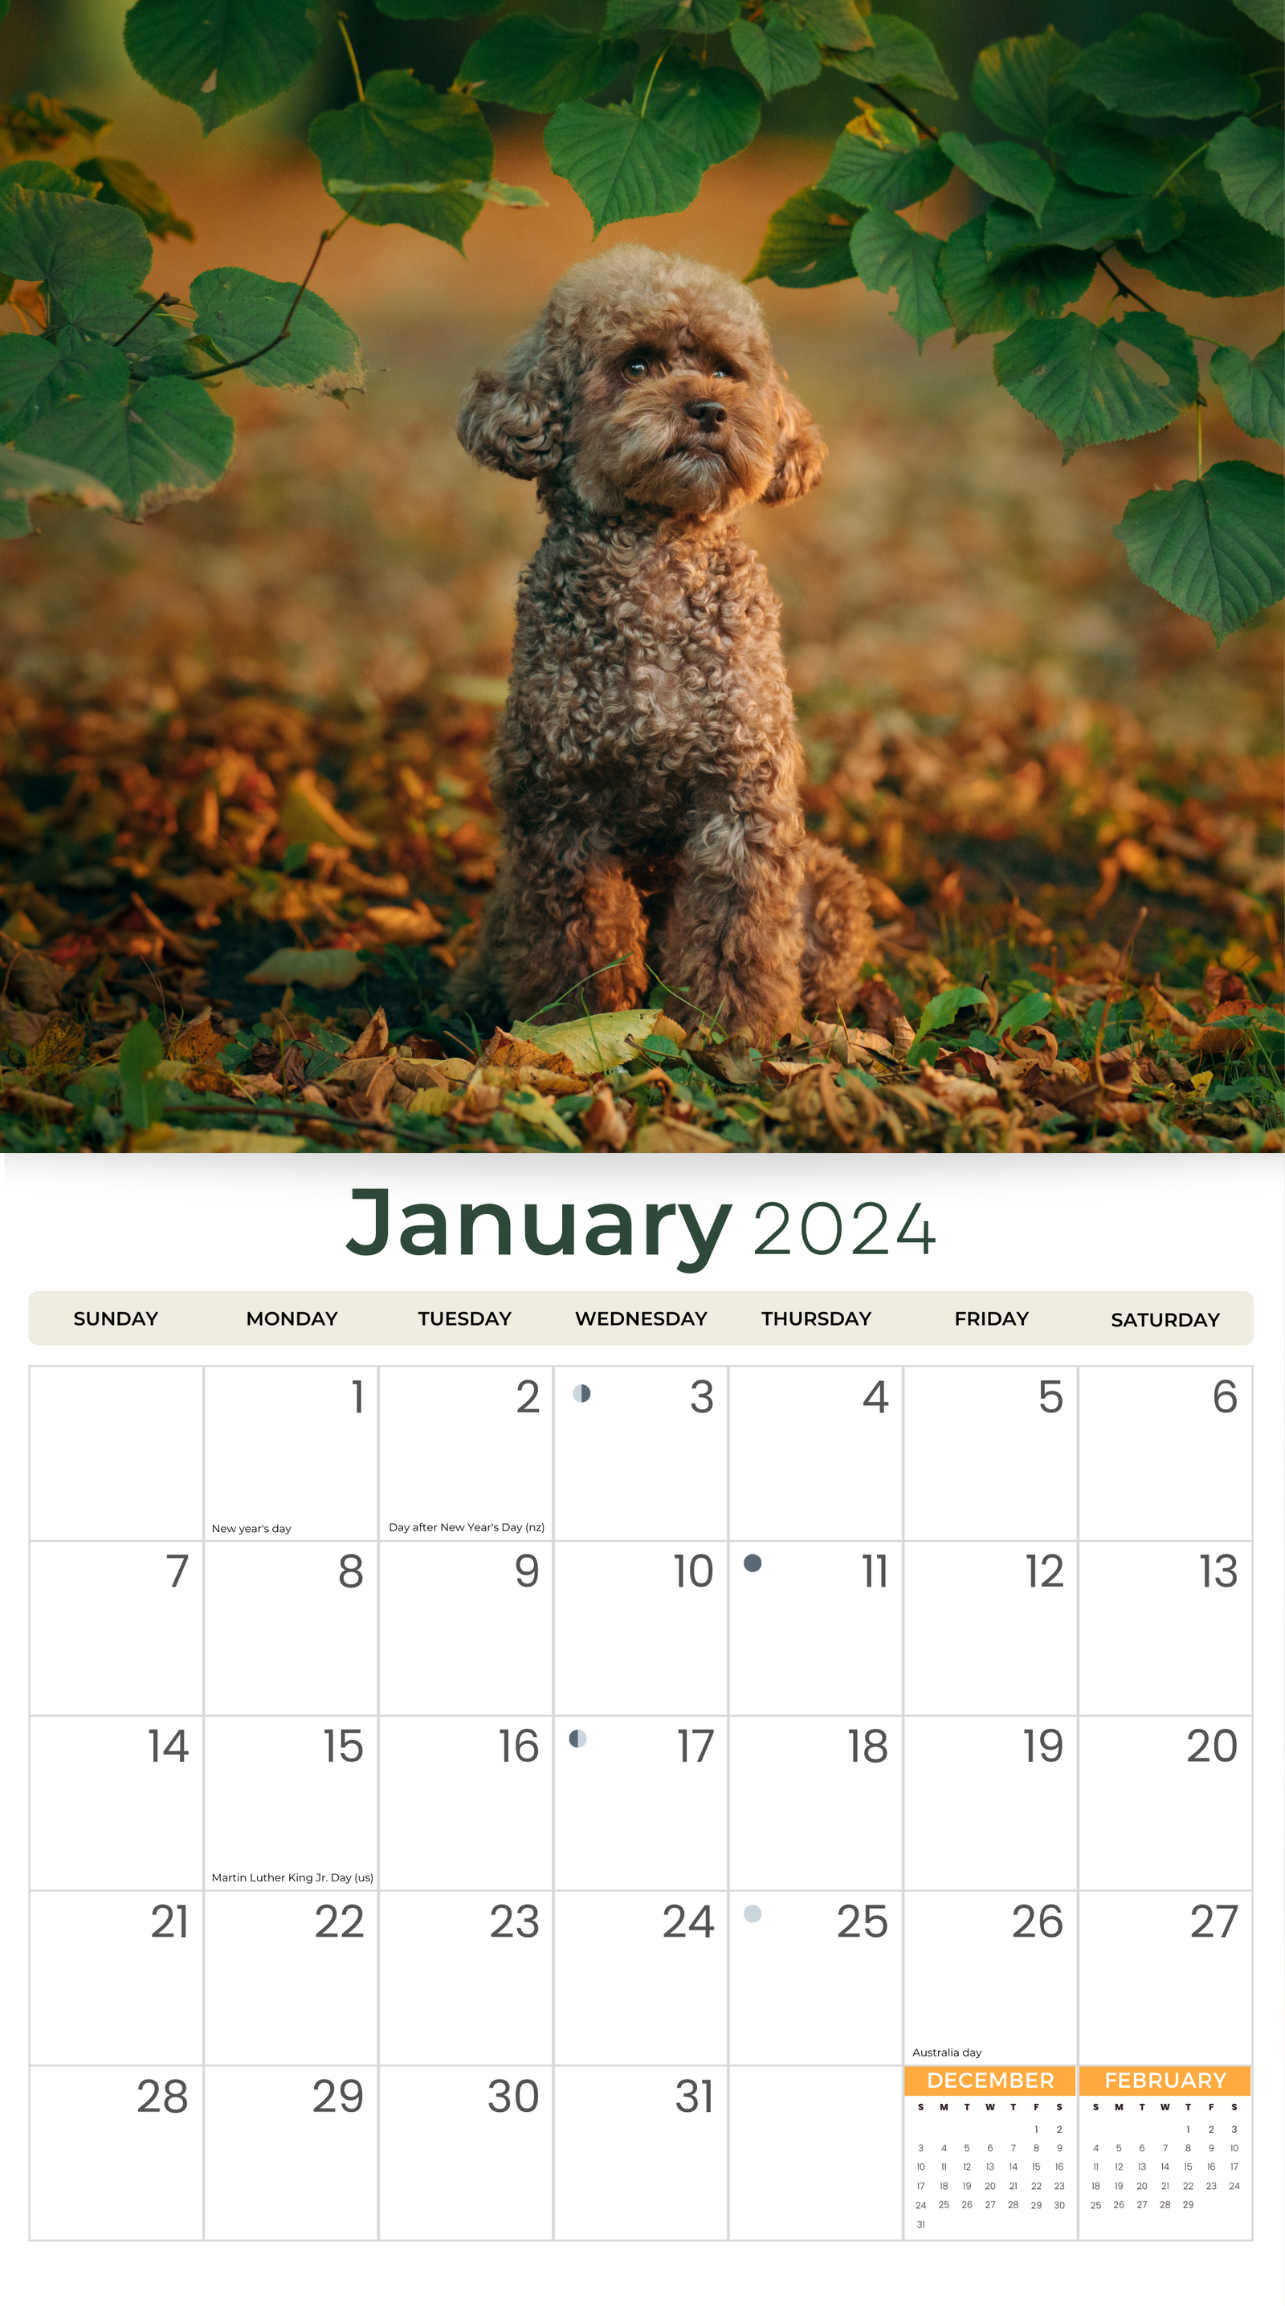 2024 Poodles Dogs & Puppies - Deluxe Wall Calendar by Just Calendars - 16 Month - Plastic Free